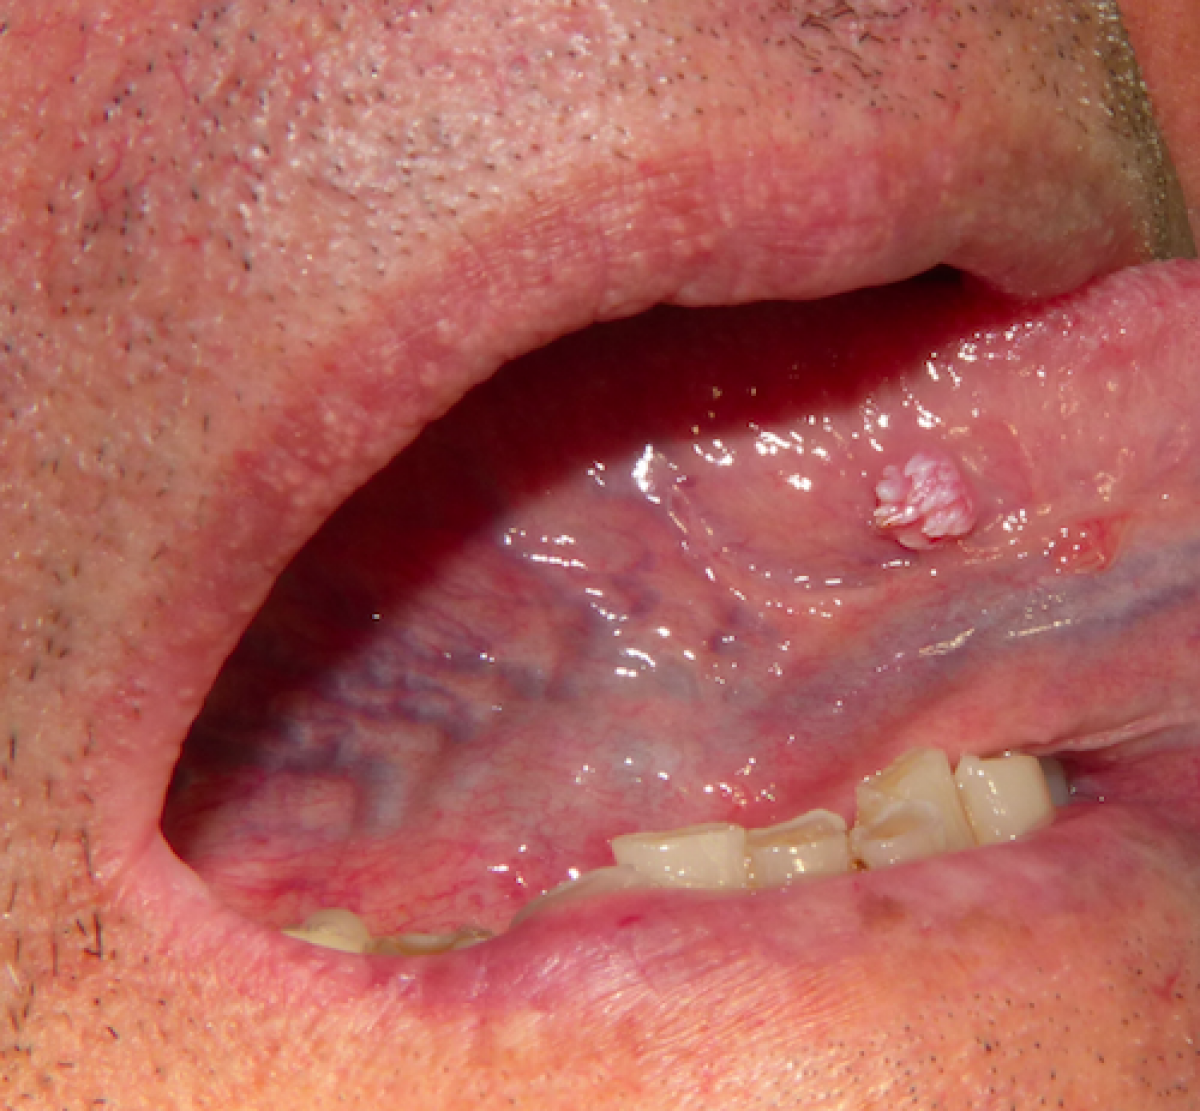 Papilloma lesion in mouth